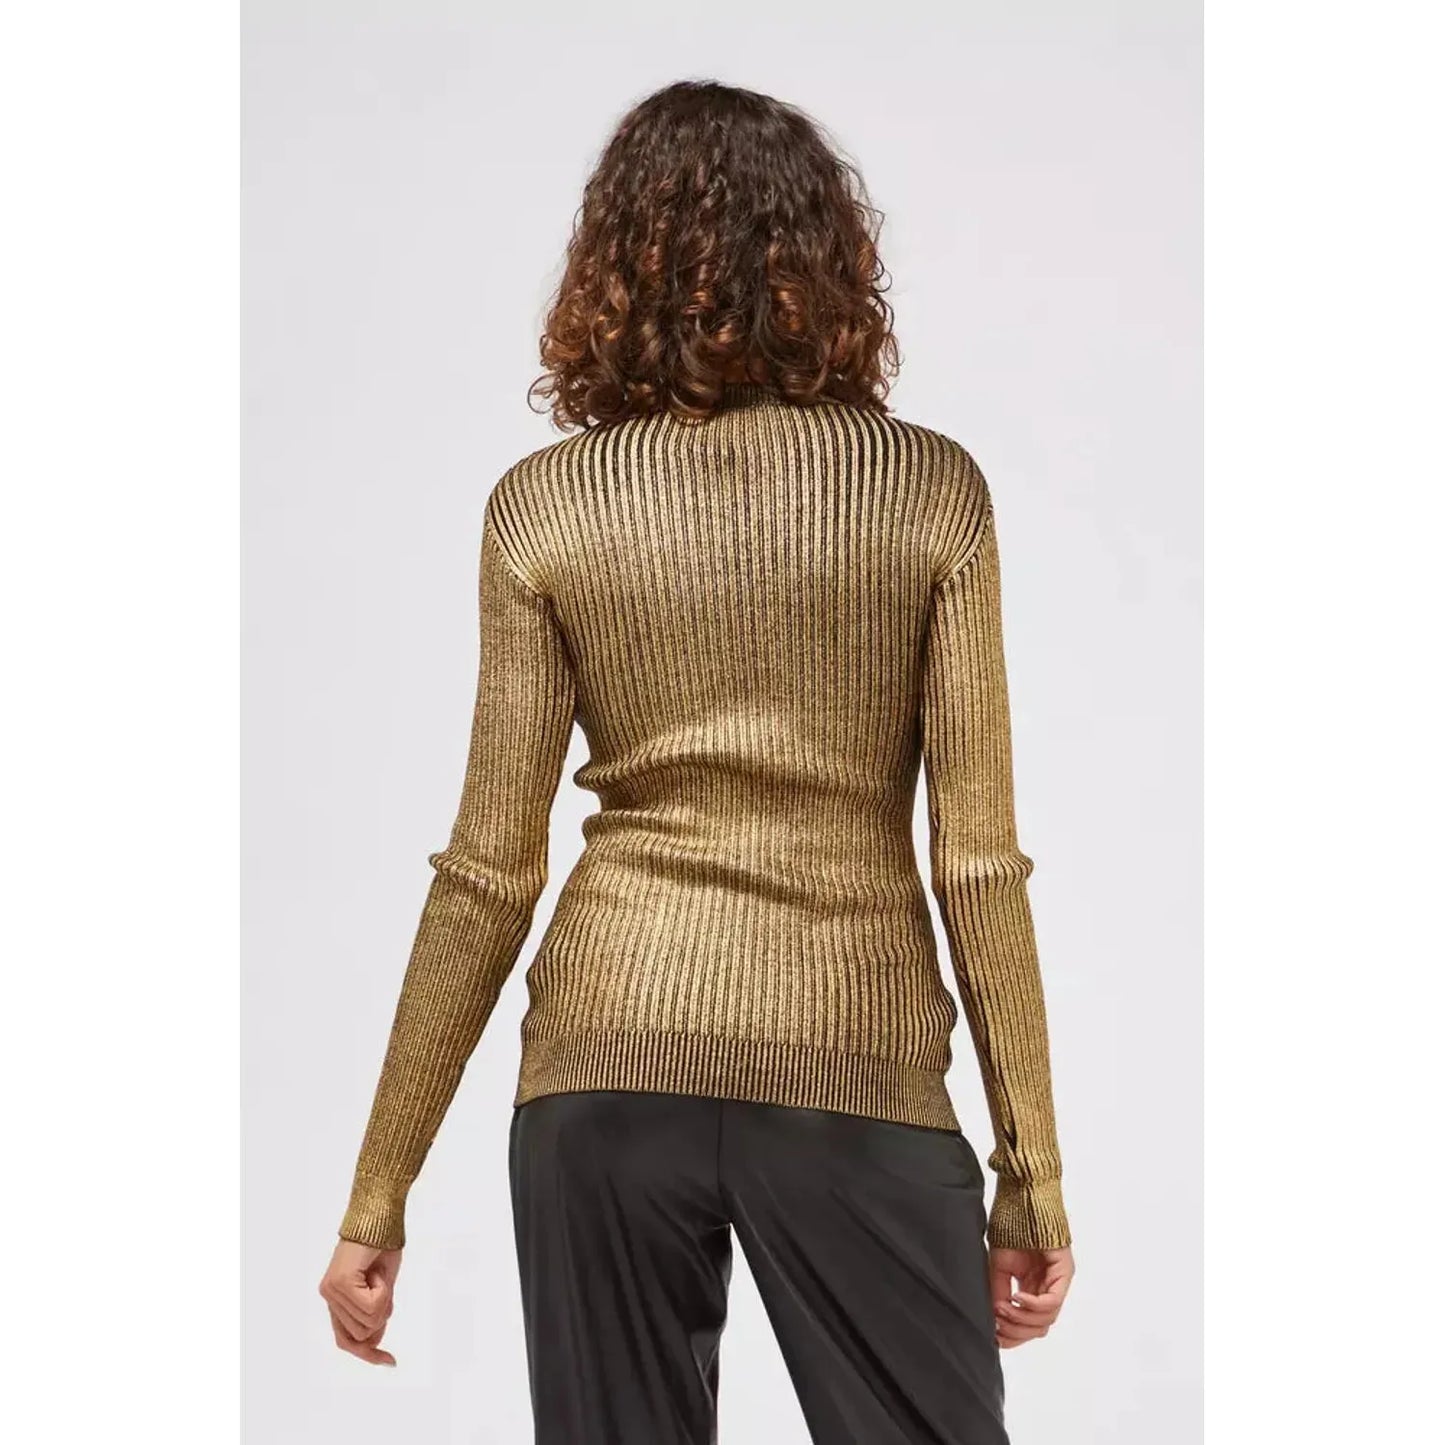 Custo Barcelona Glamorous Gold Long-Sleeved Sweater with Fancy Print gold-wool-sweater